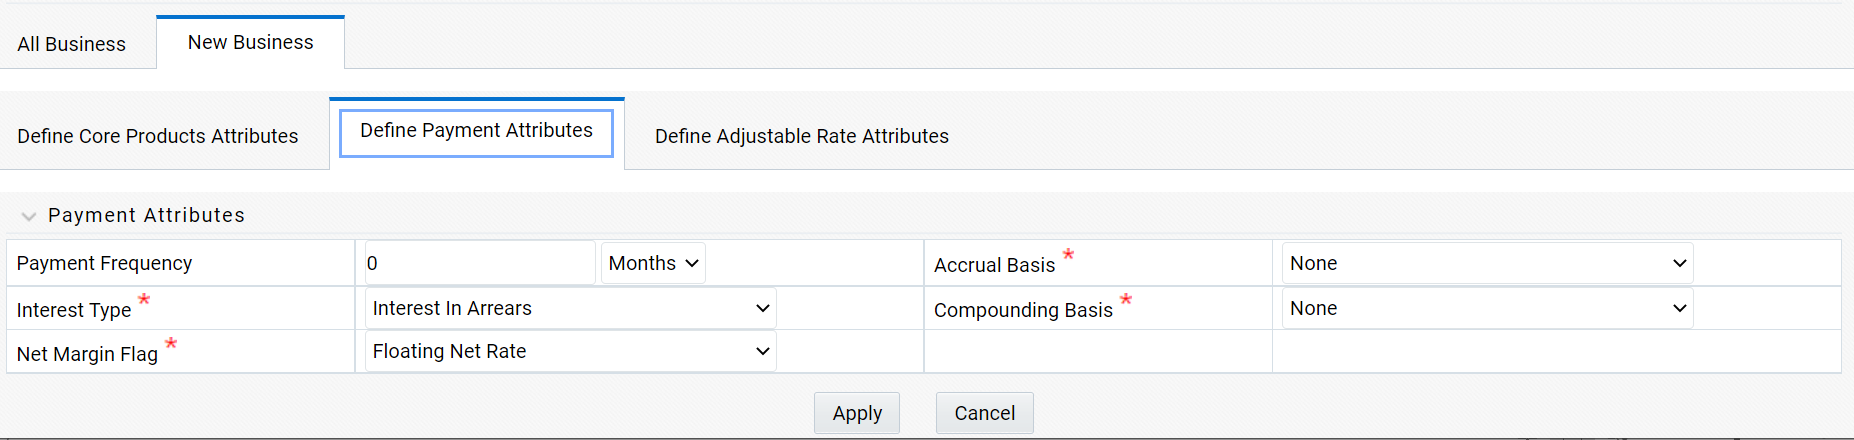 Define Payment Attributes Tab to Define the Product Characteristic Rule